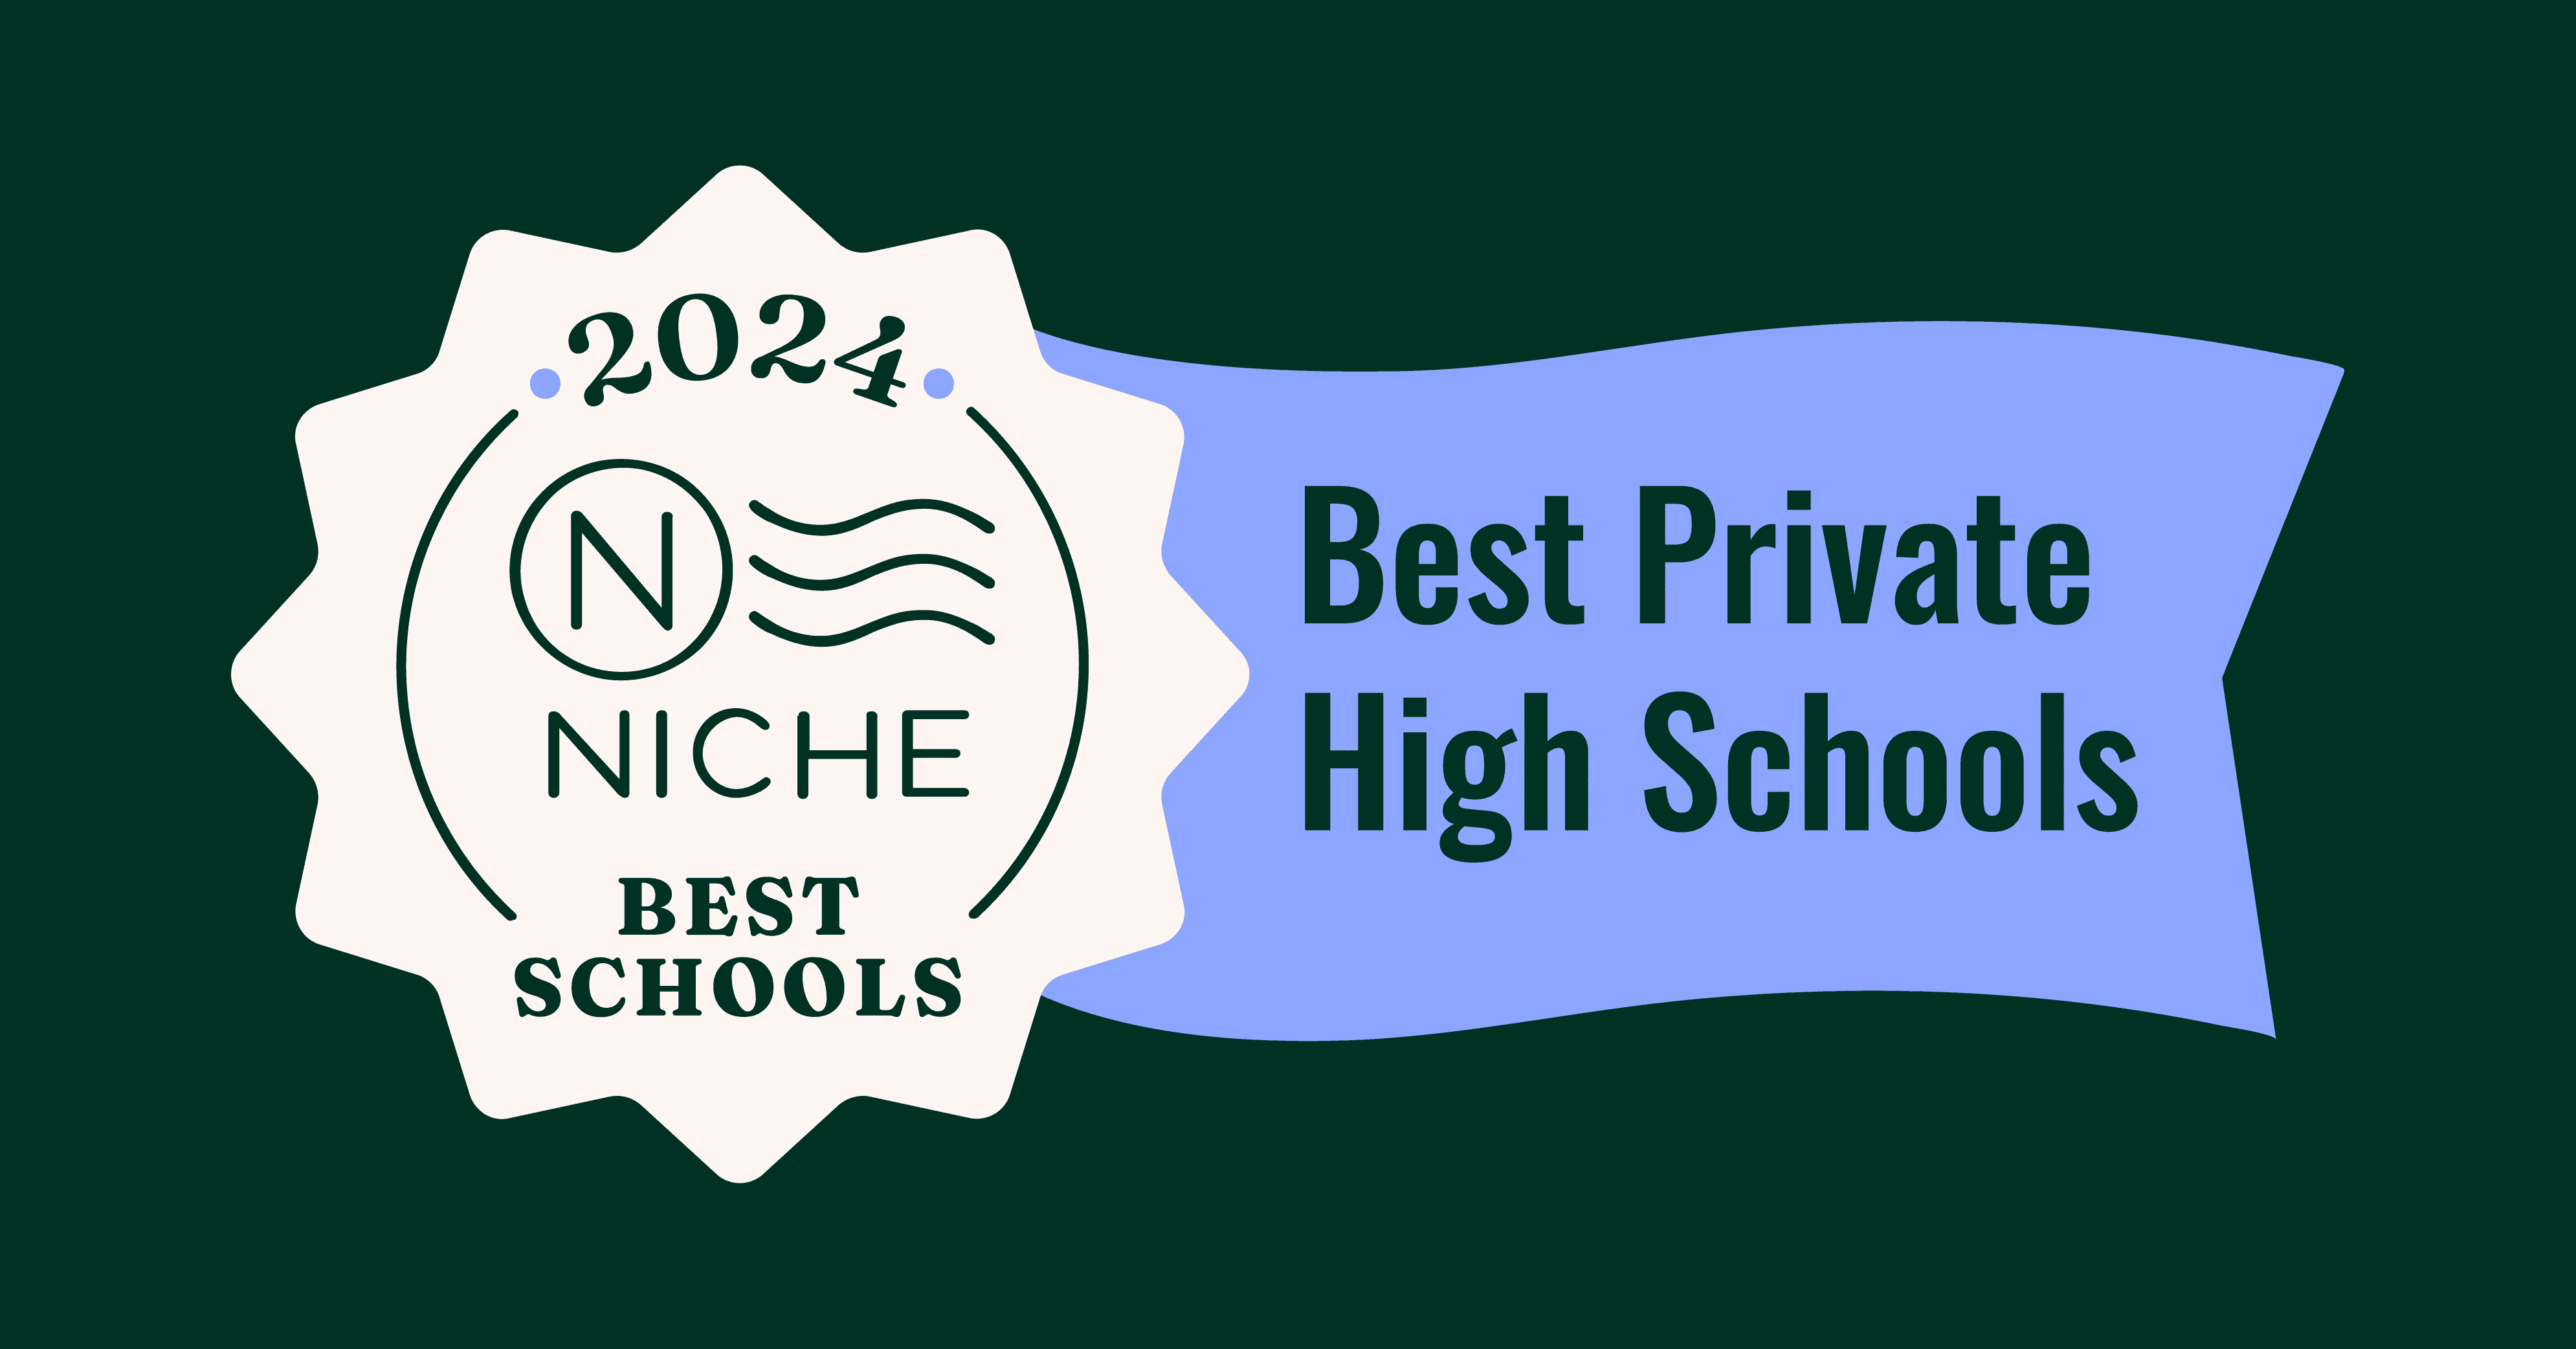 University School of the Lowcountry is a proud 2024 NICHE Best Private High School honoree.